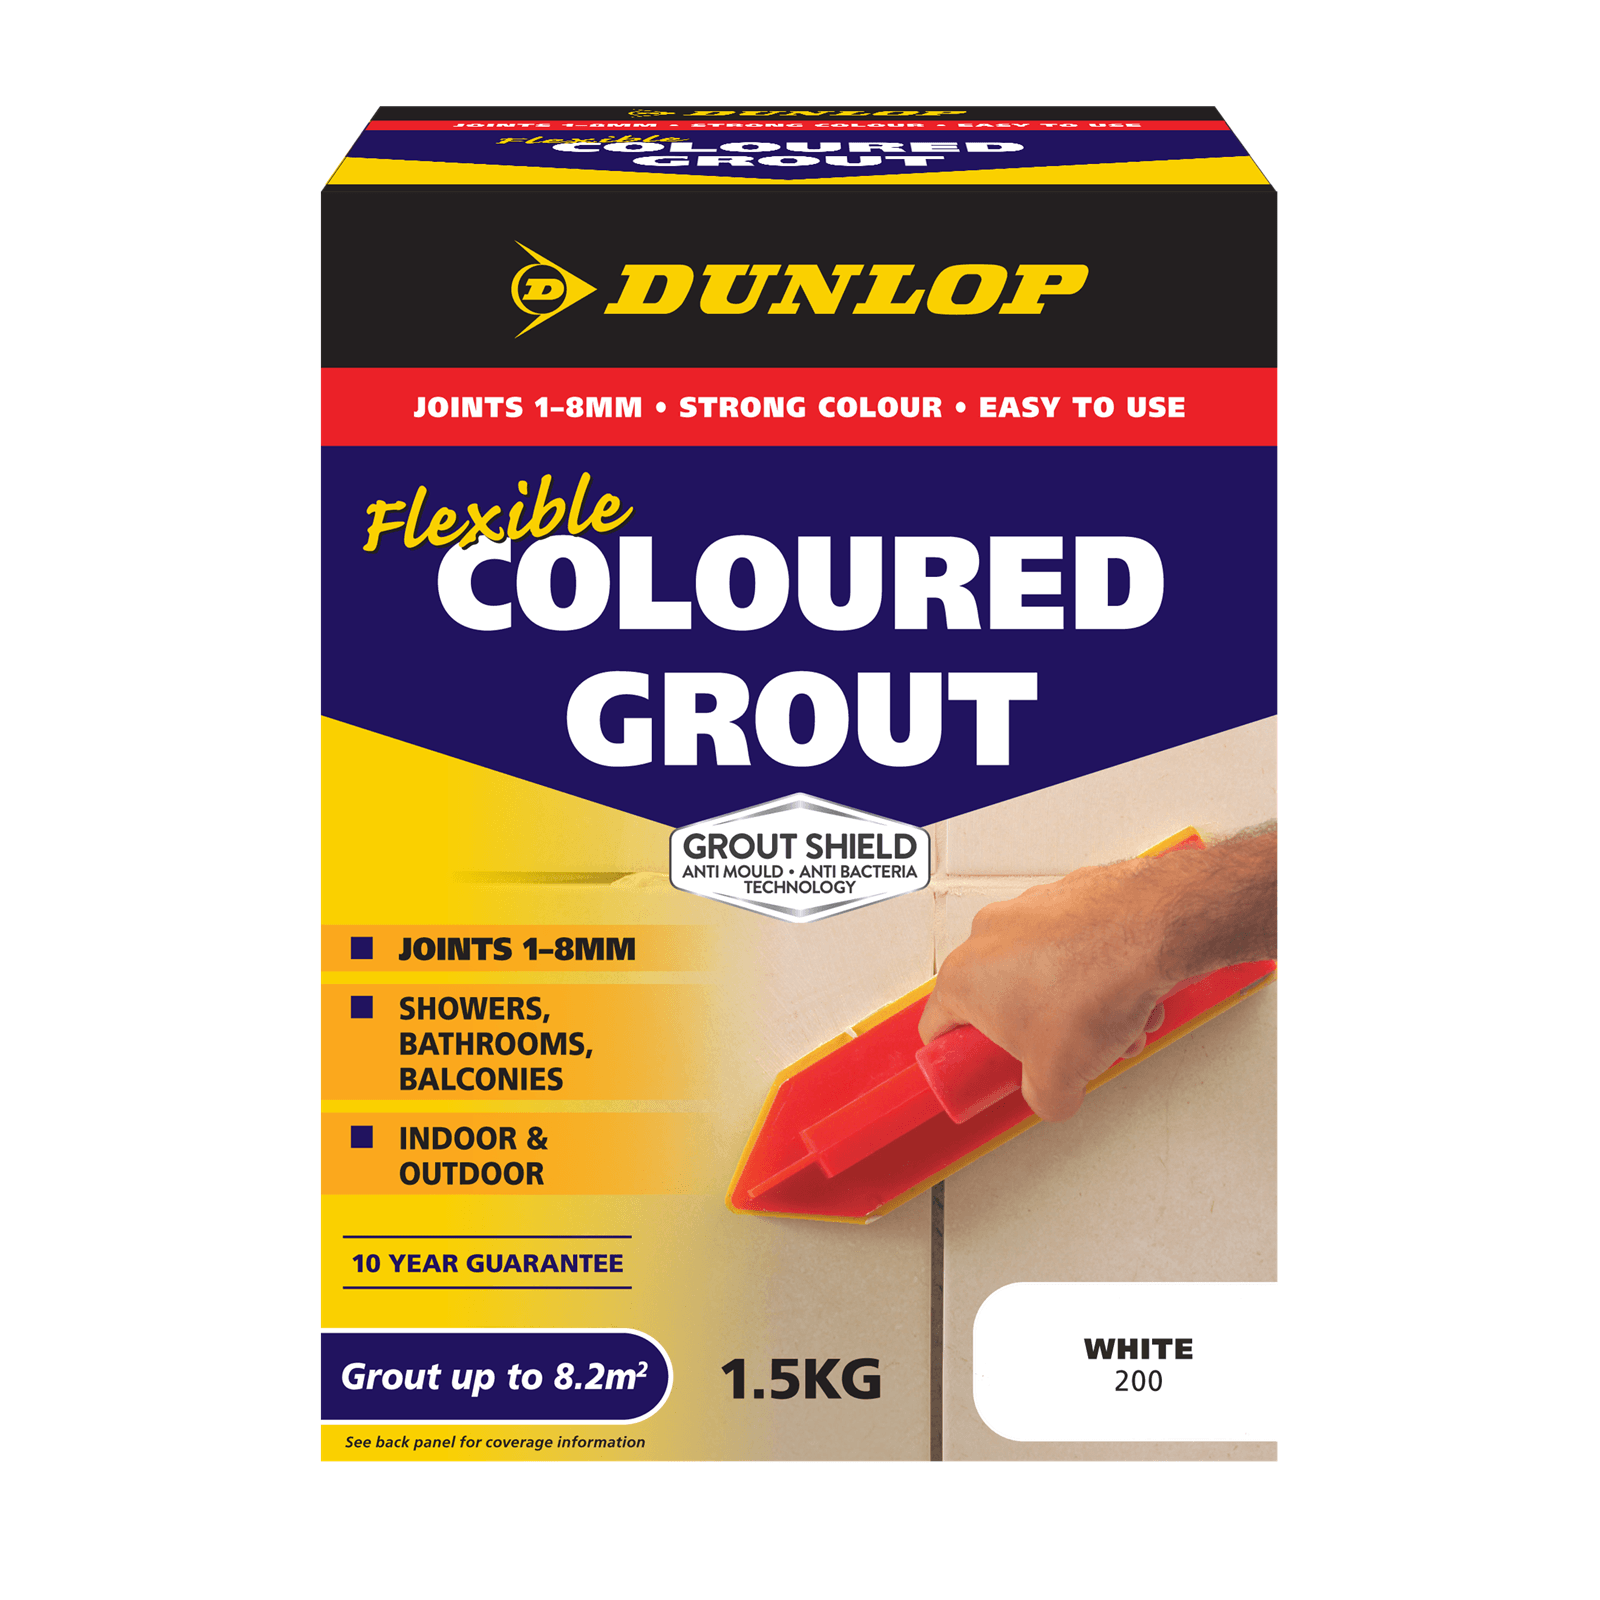 DUNLOP Flexible Coloured Grout 1.5Kg White Grout Up To 8.2m² #200 - Double Bay Hardware